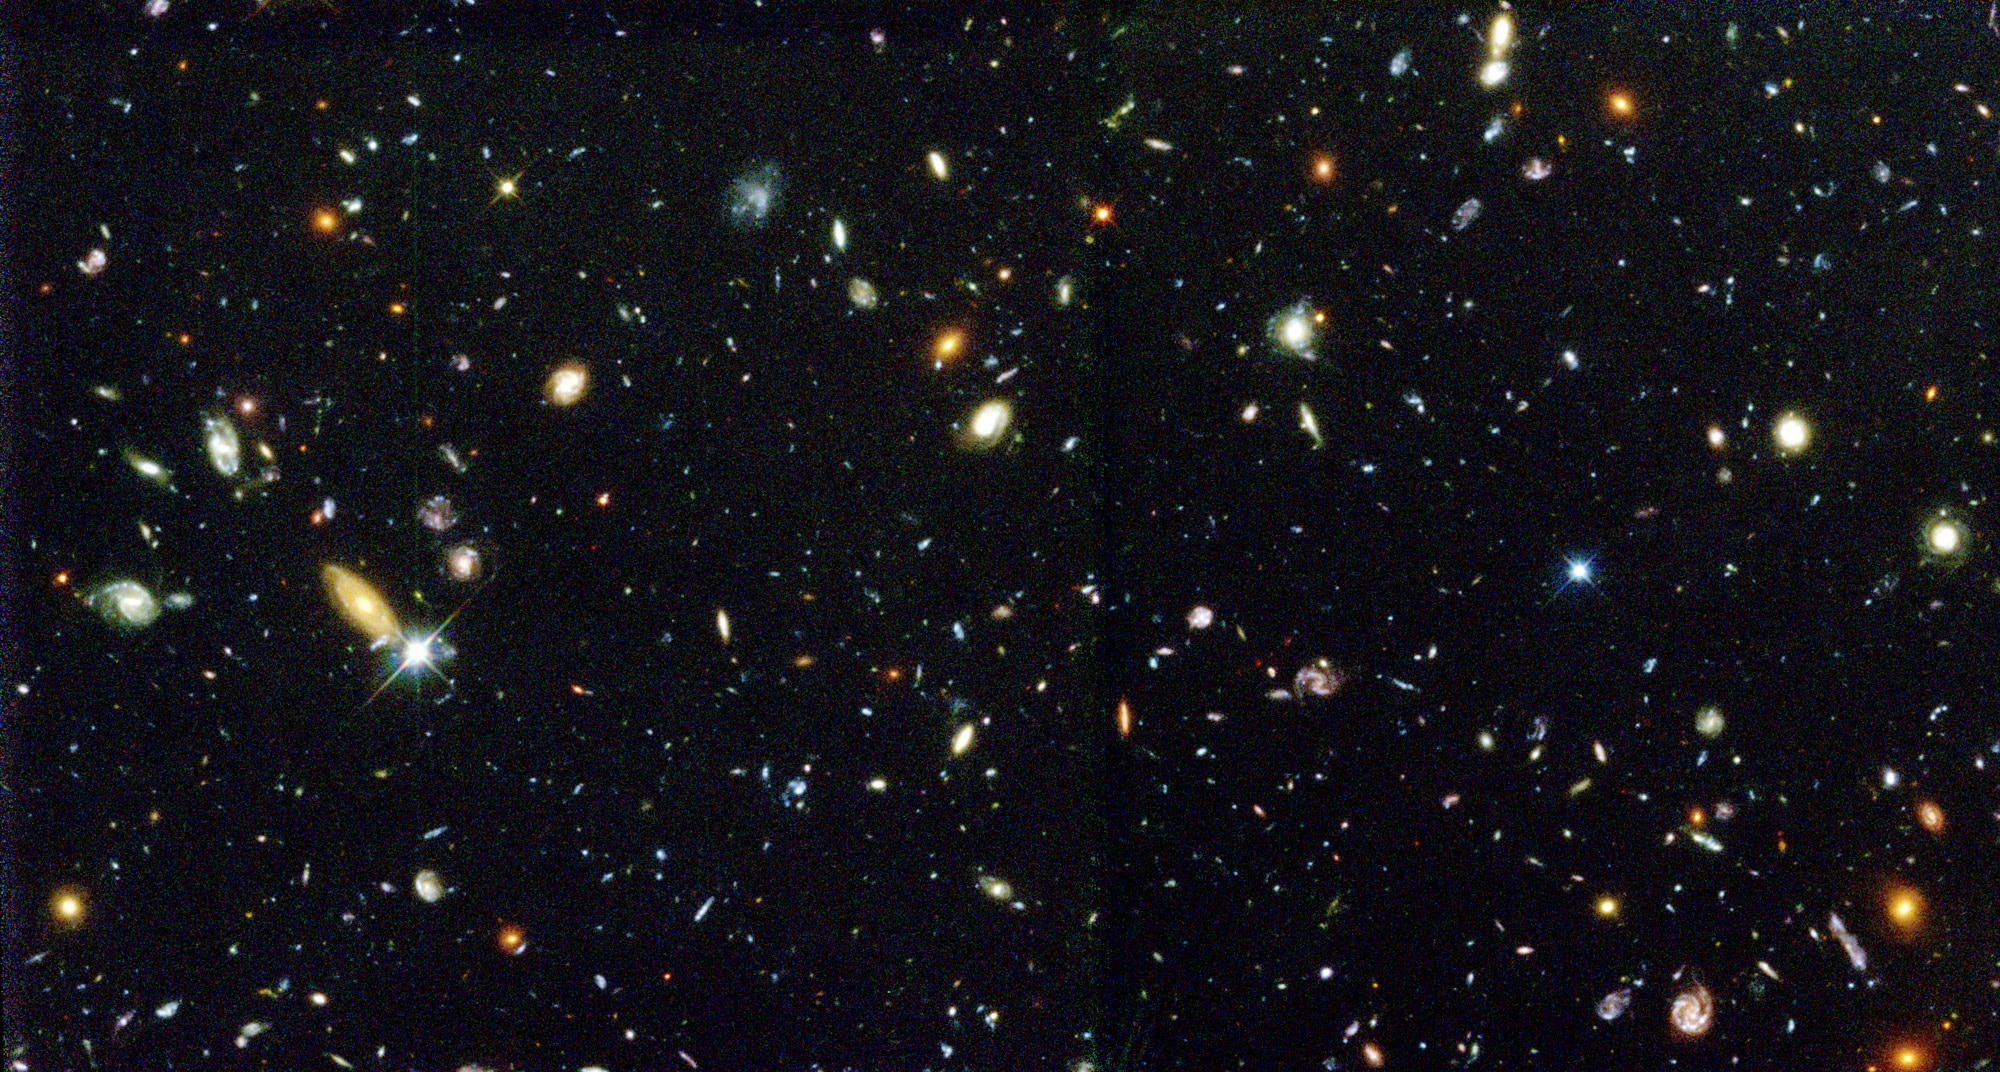 A portion of the Hubble Deep Field. Credit: R. Williams (STScI), the Hubble Deep Field Team and NASA/ESA